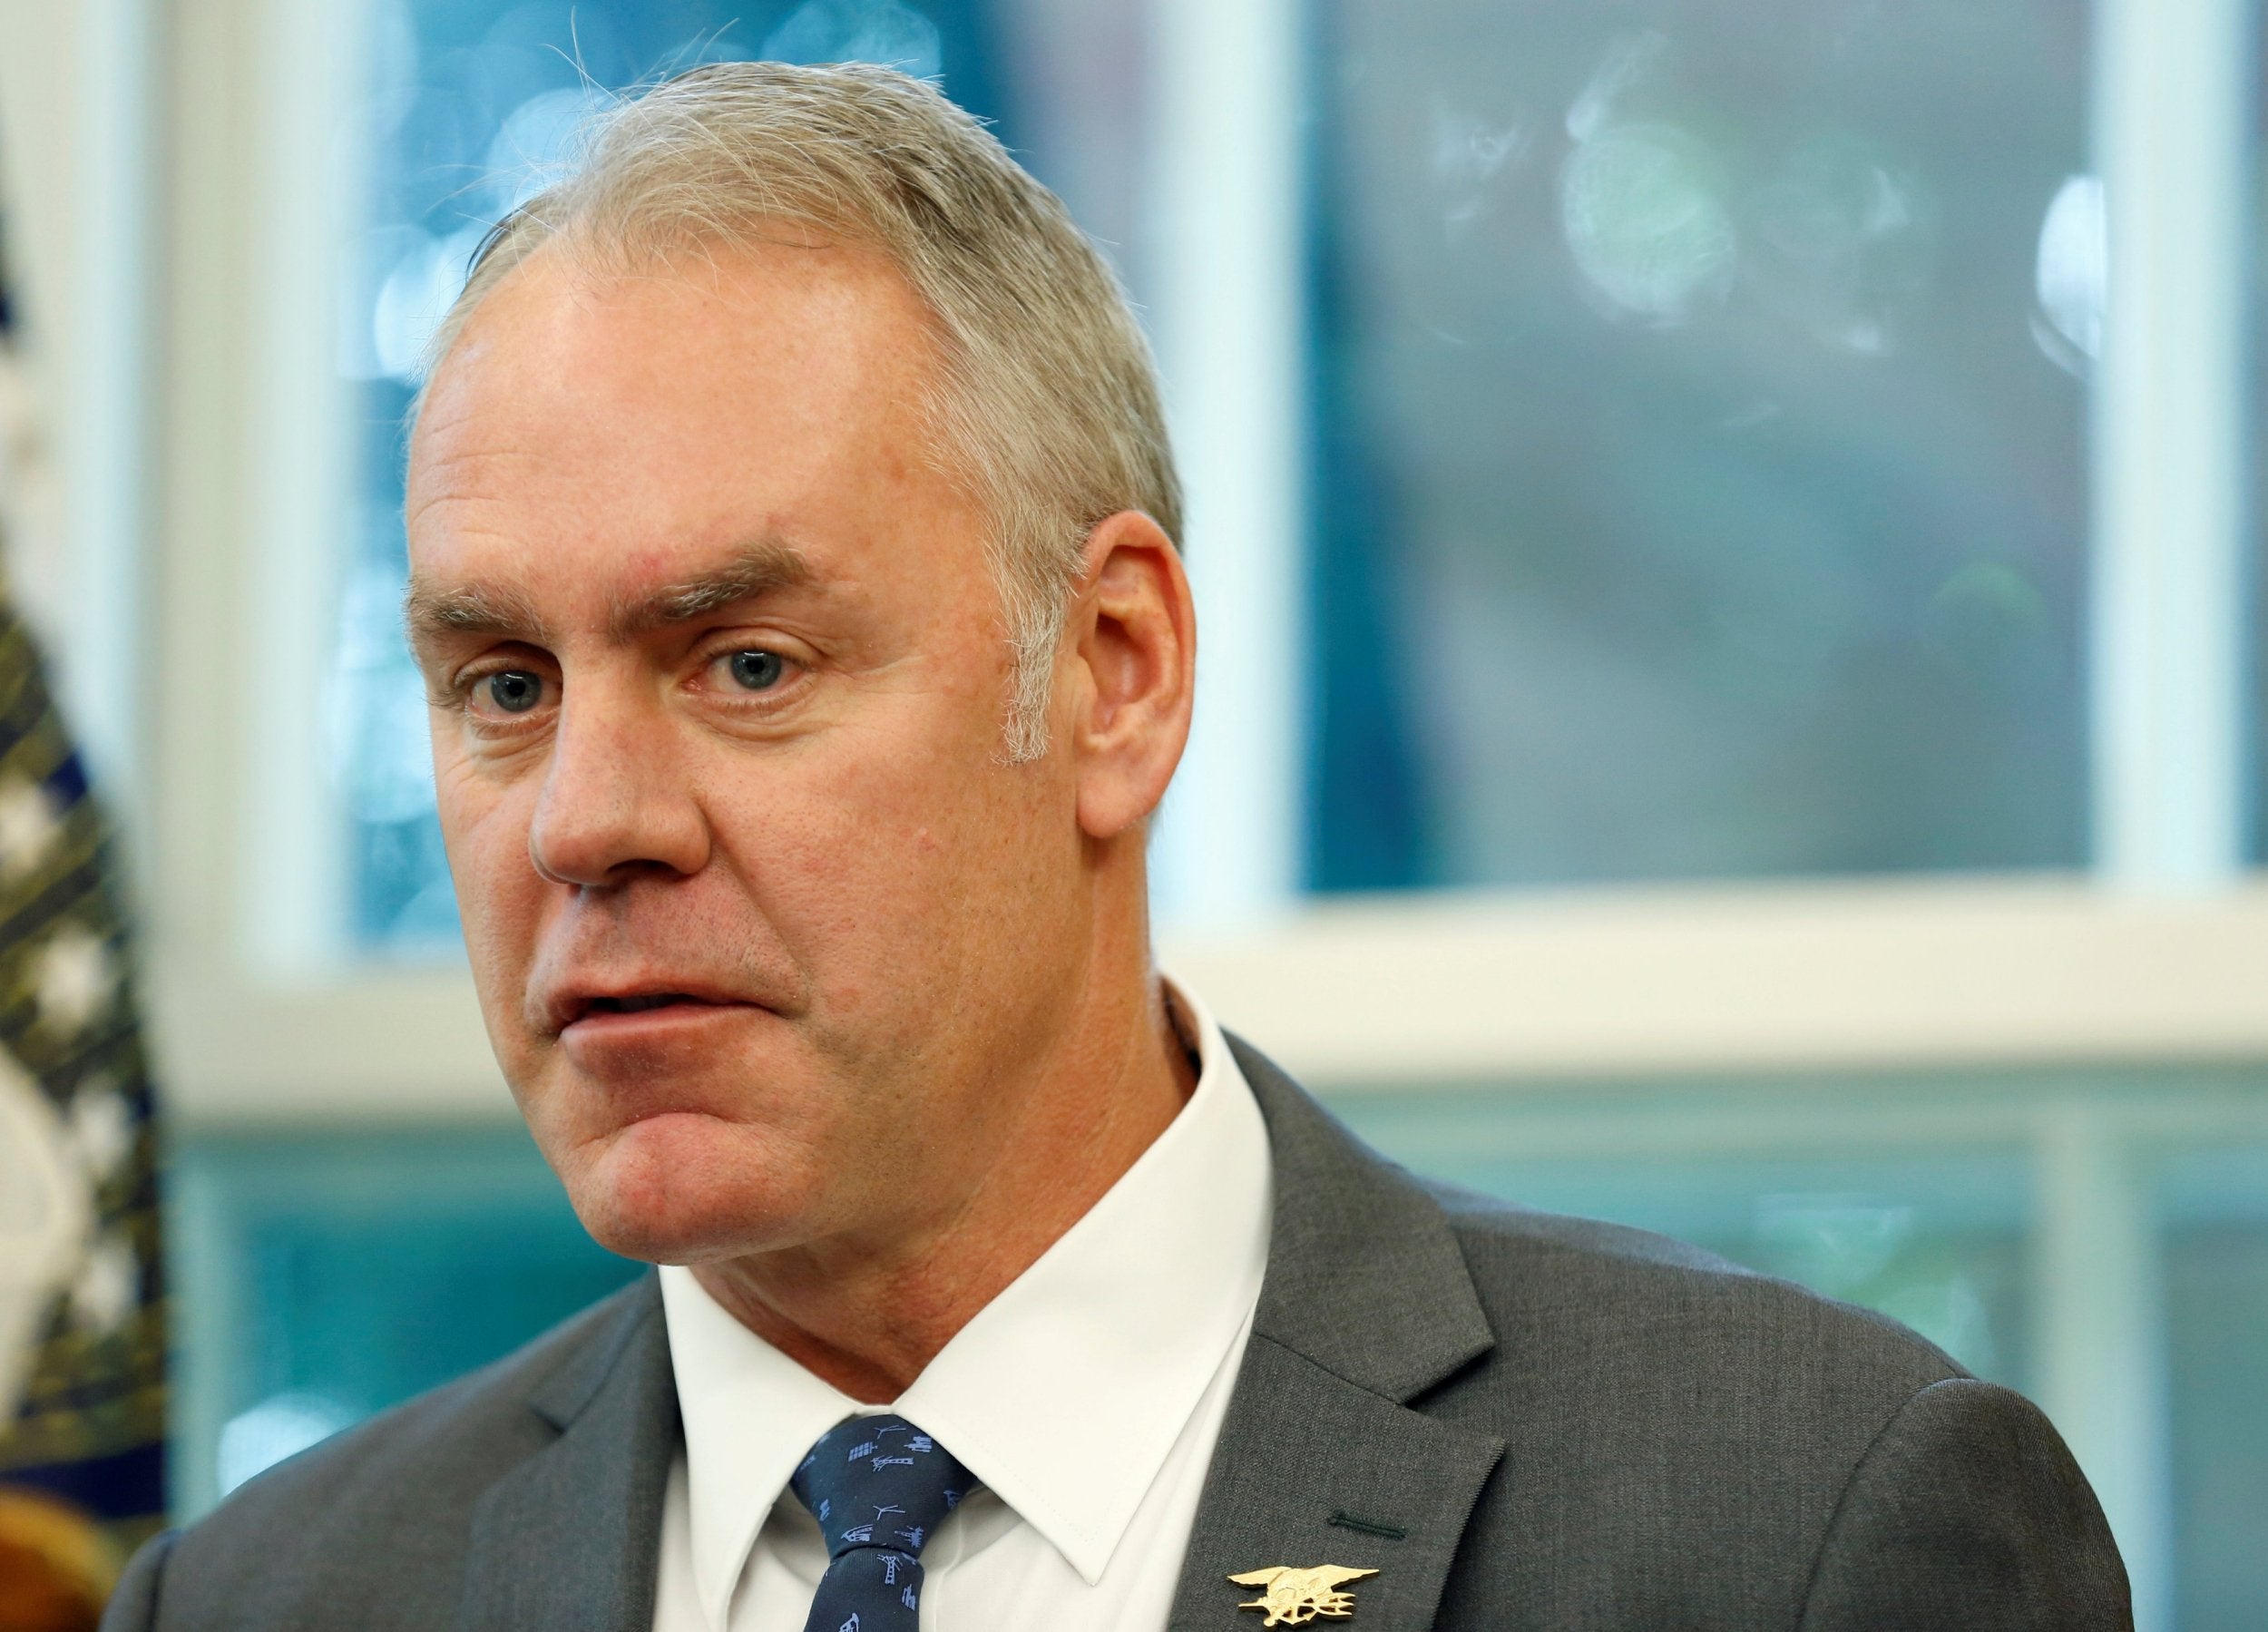 Secretary of Interior Ryan Zinke will be leaving Donald Trump’s White House administration amid pressure over allegations of ethics violations